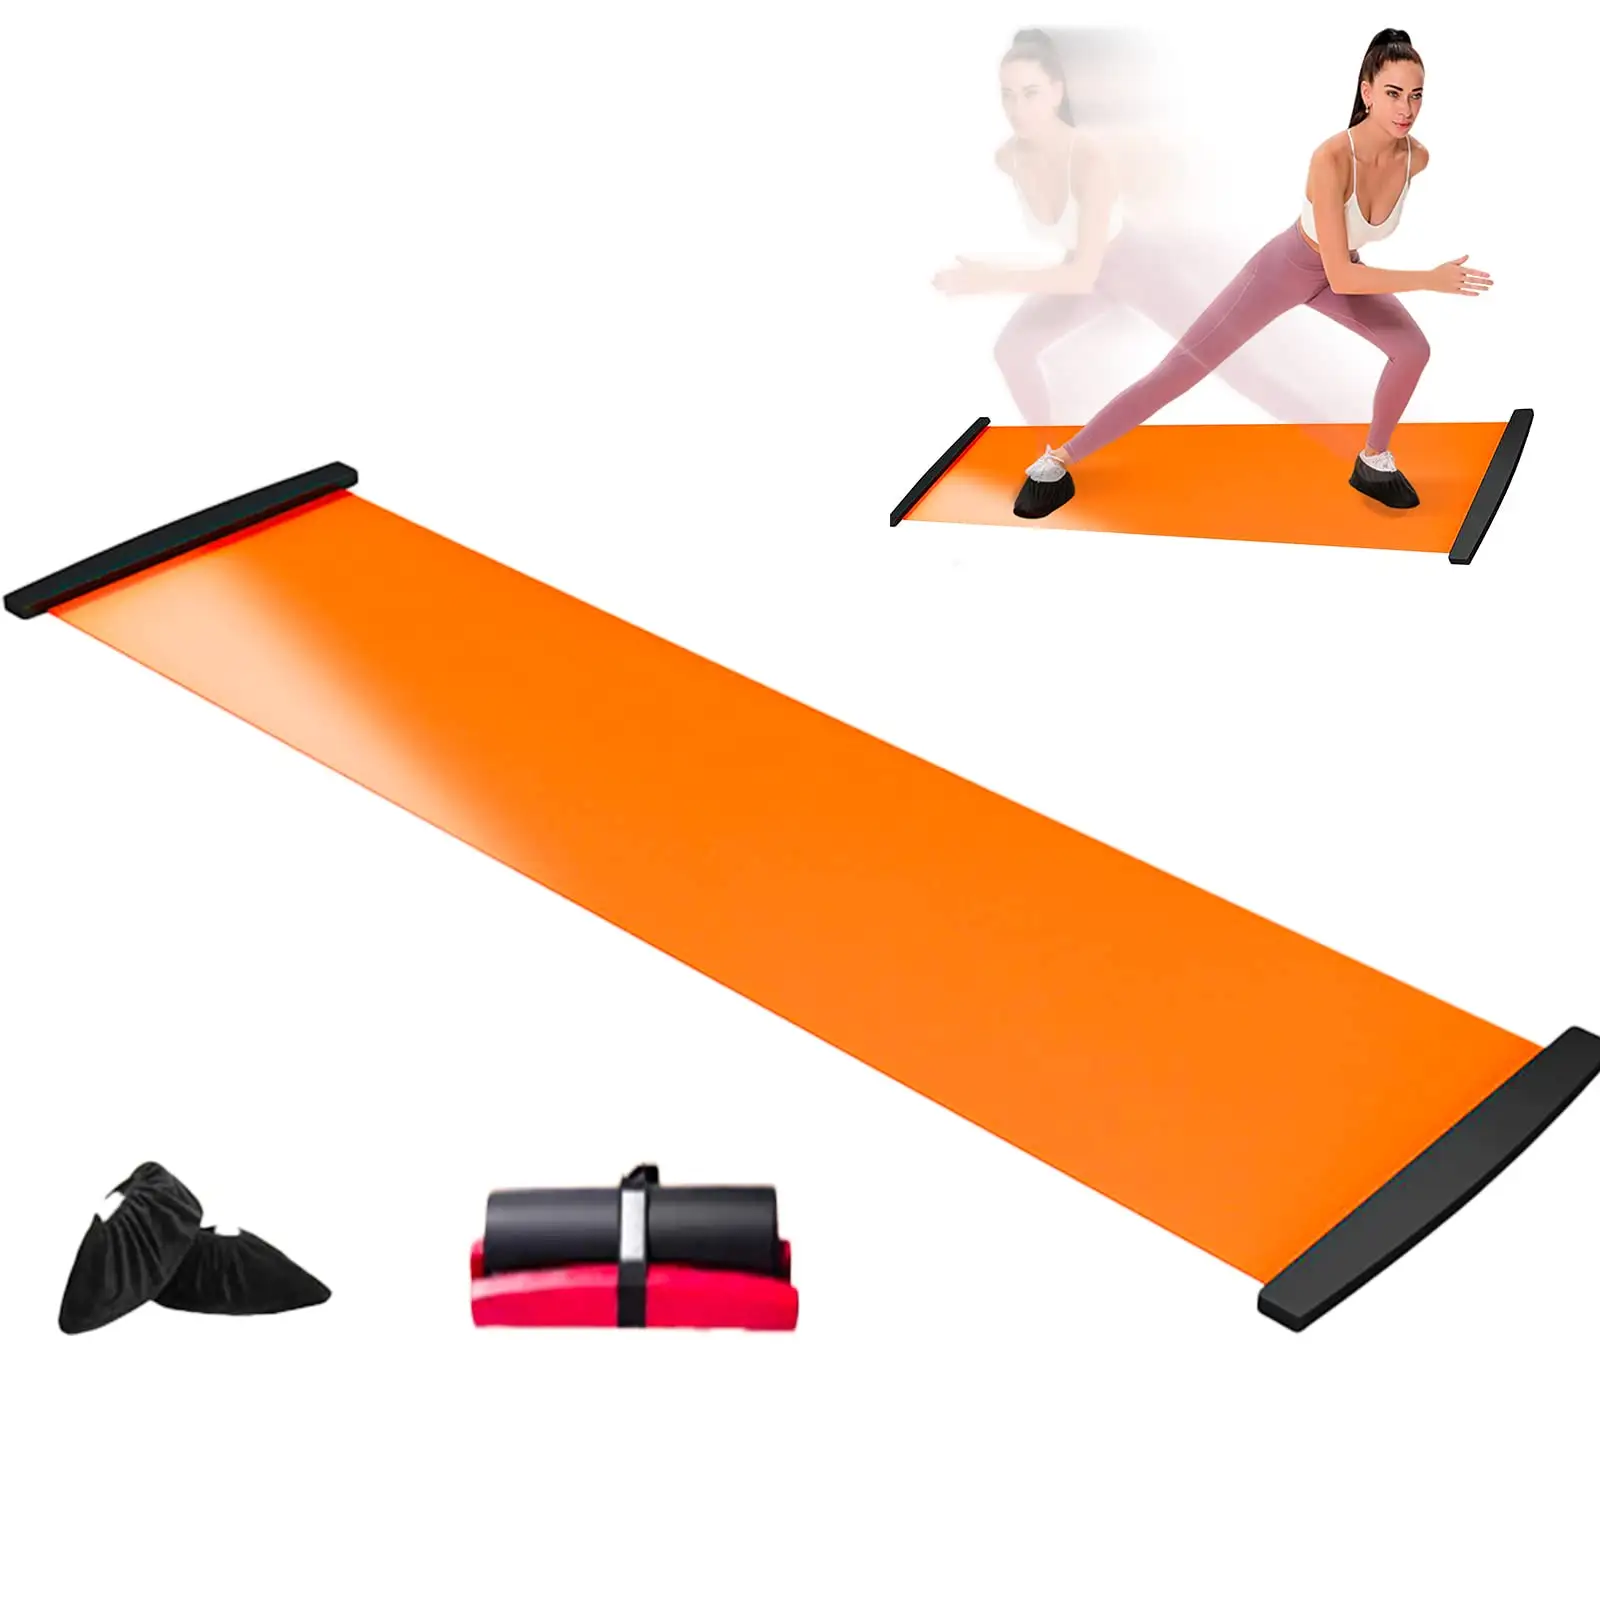 Golf training mat fitness shape your body burn fat fast all-round muscle training pelvic muscle floor exercise slide boardboard